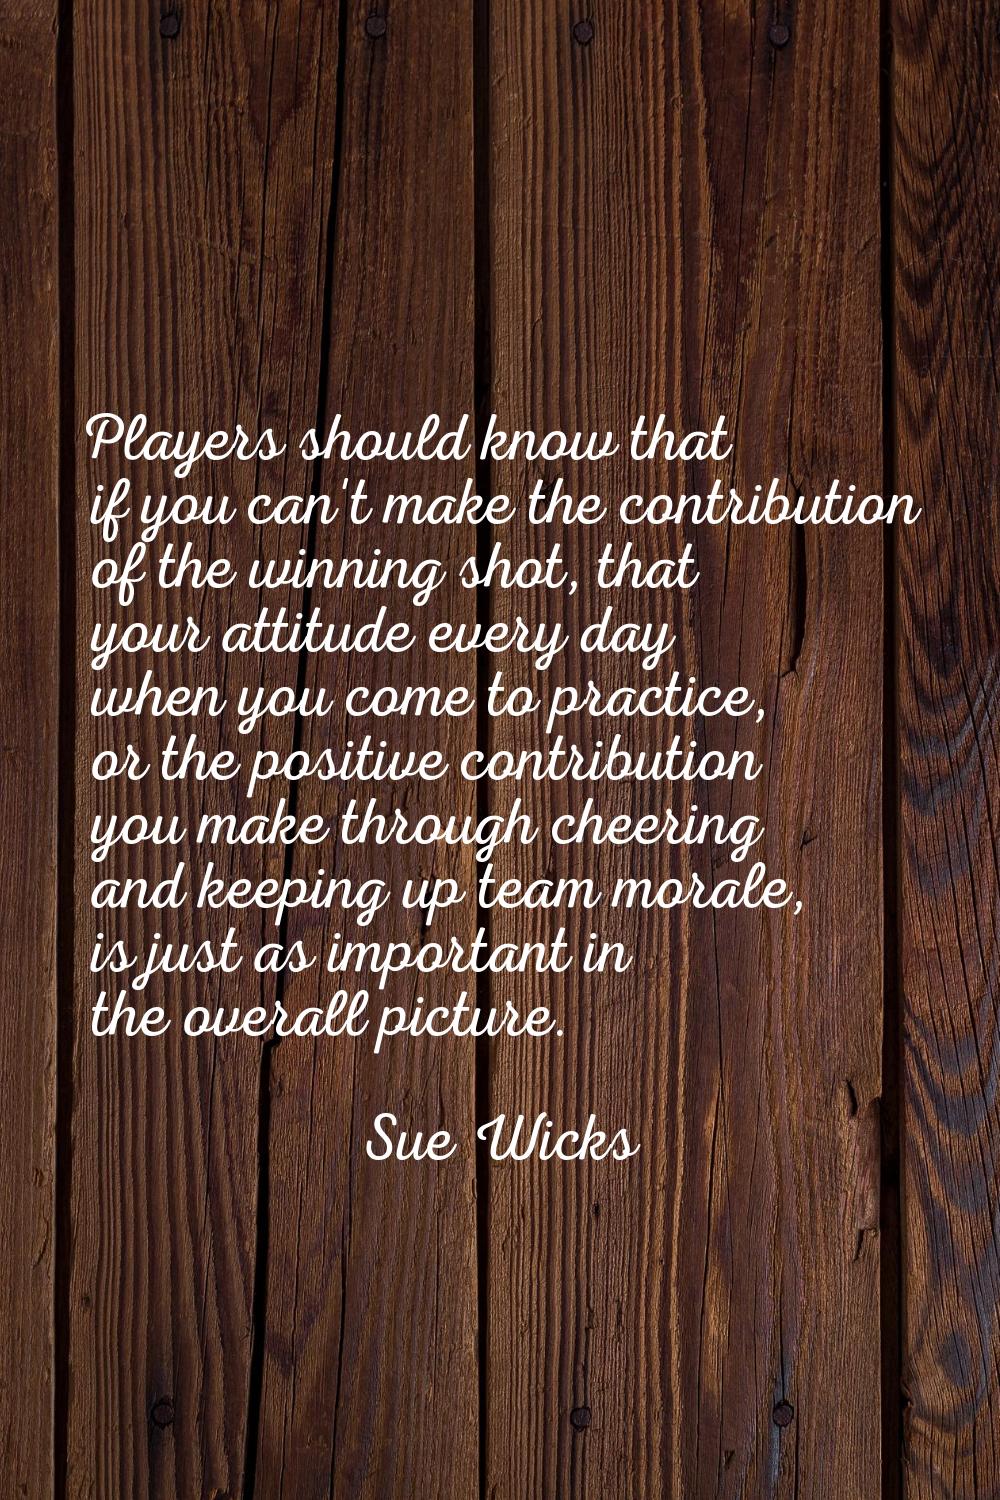 Players should know that if you can't make the contribution of the winning shot, that your attitude